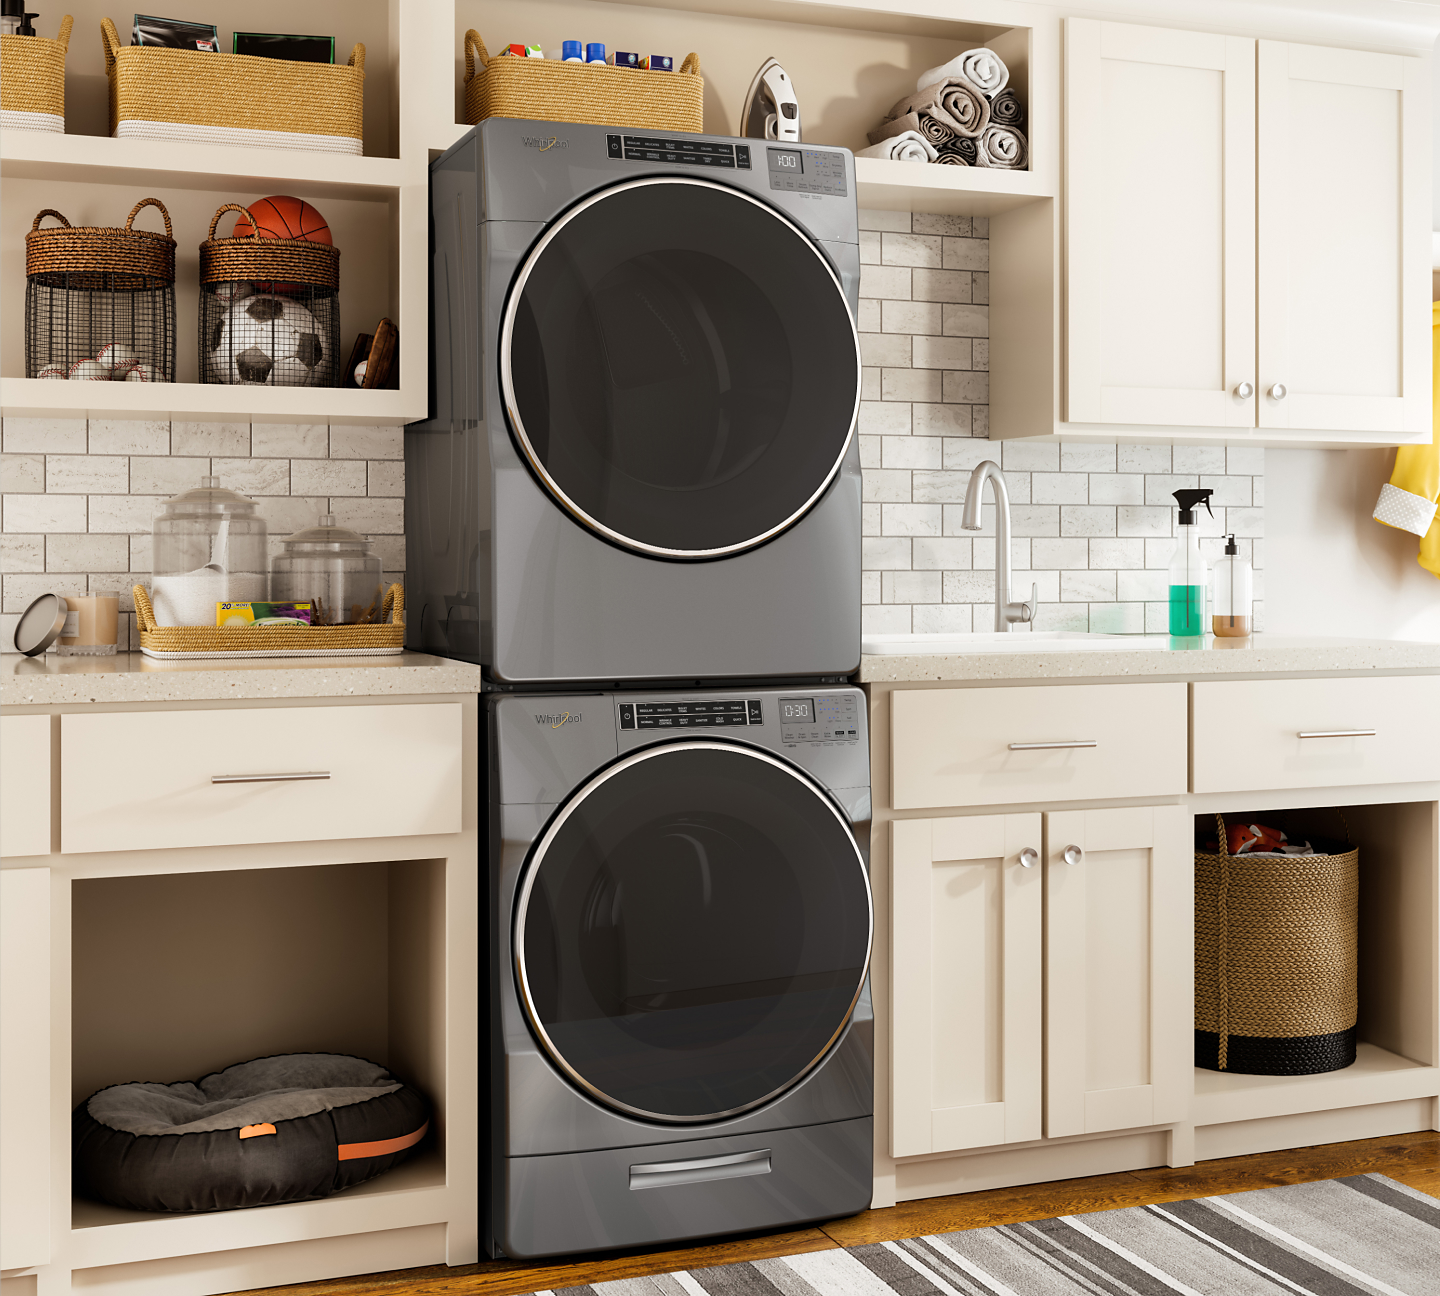 Is Tumble Dry? Learn to Tumble Dry | Whirlpool